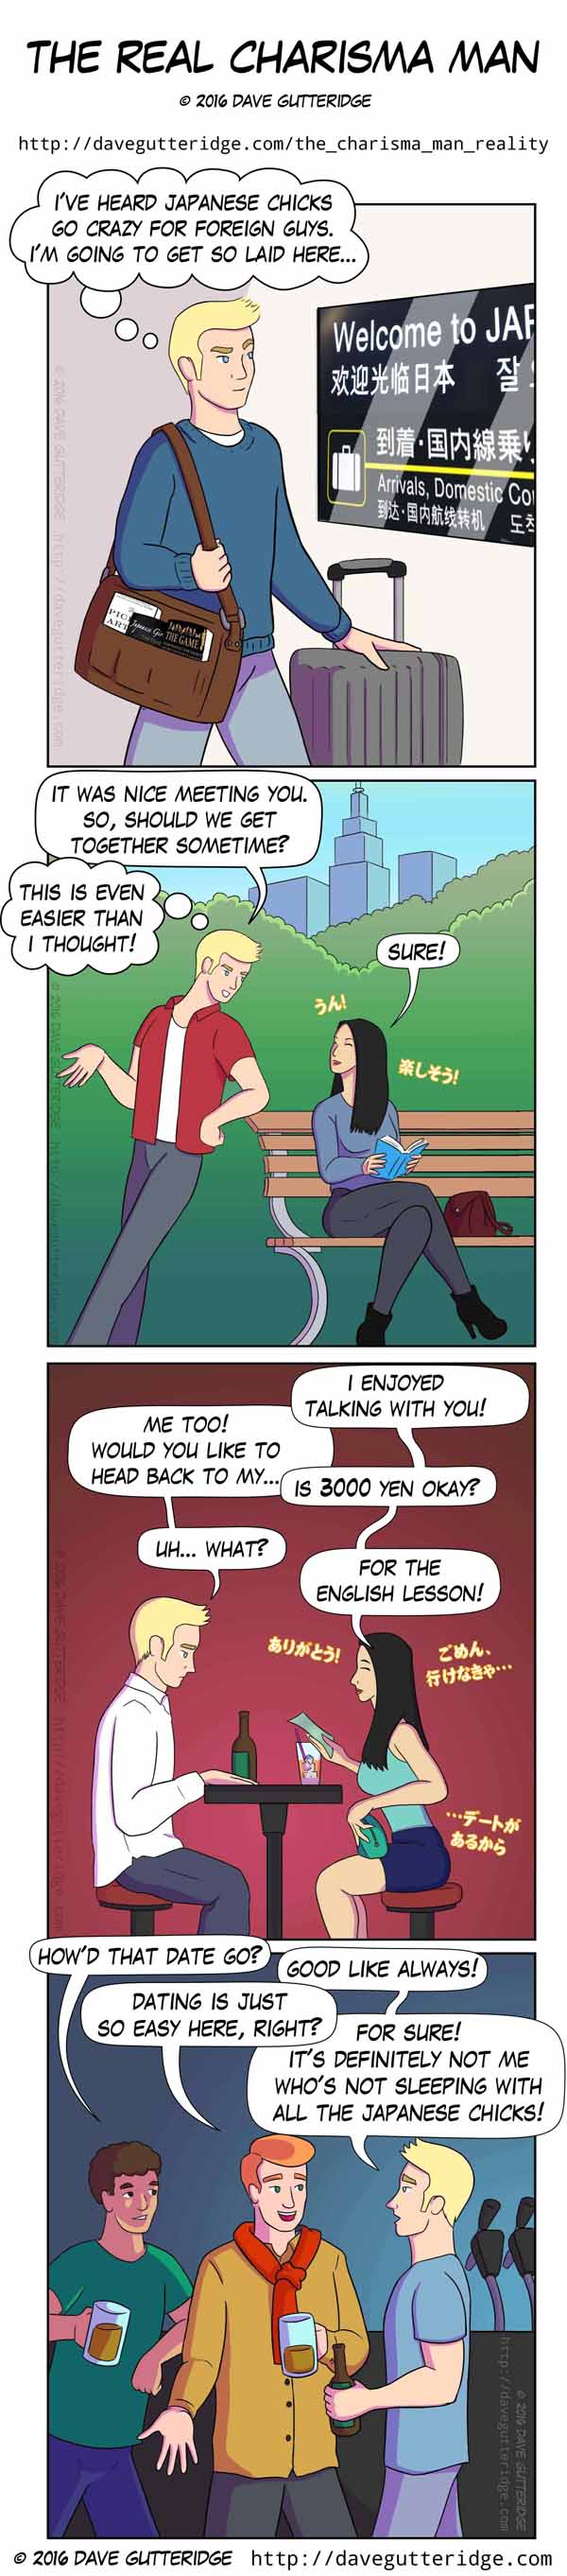 A comic showing a fireign man and a Japanese woman on a date.